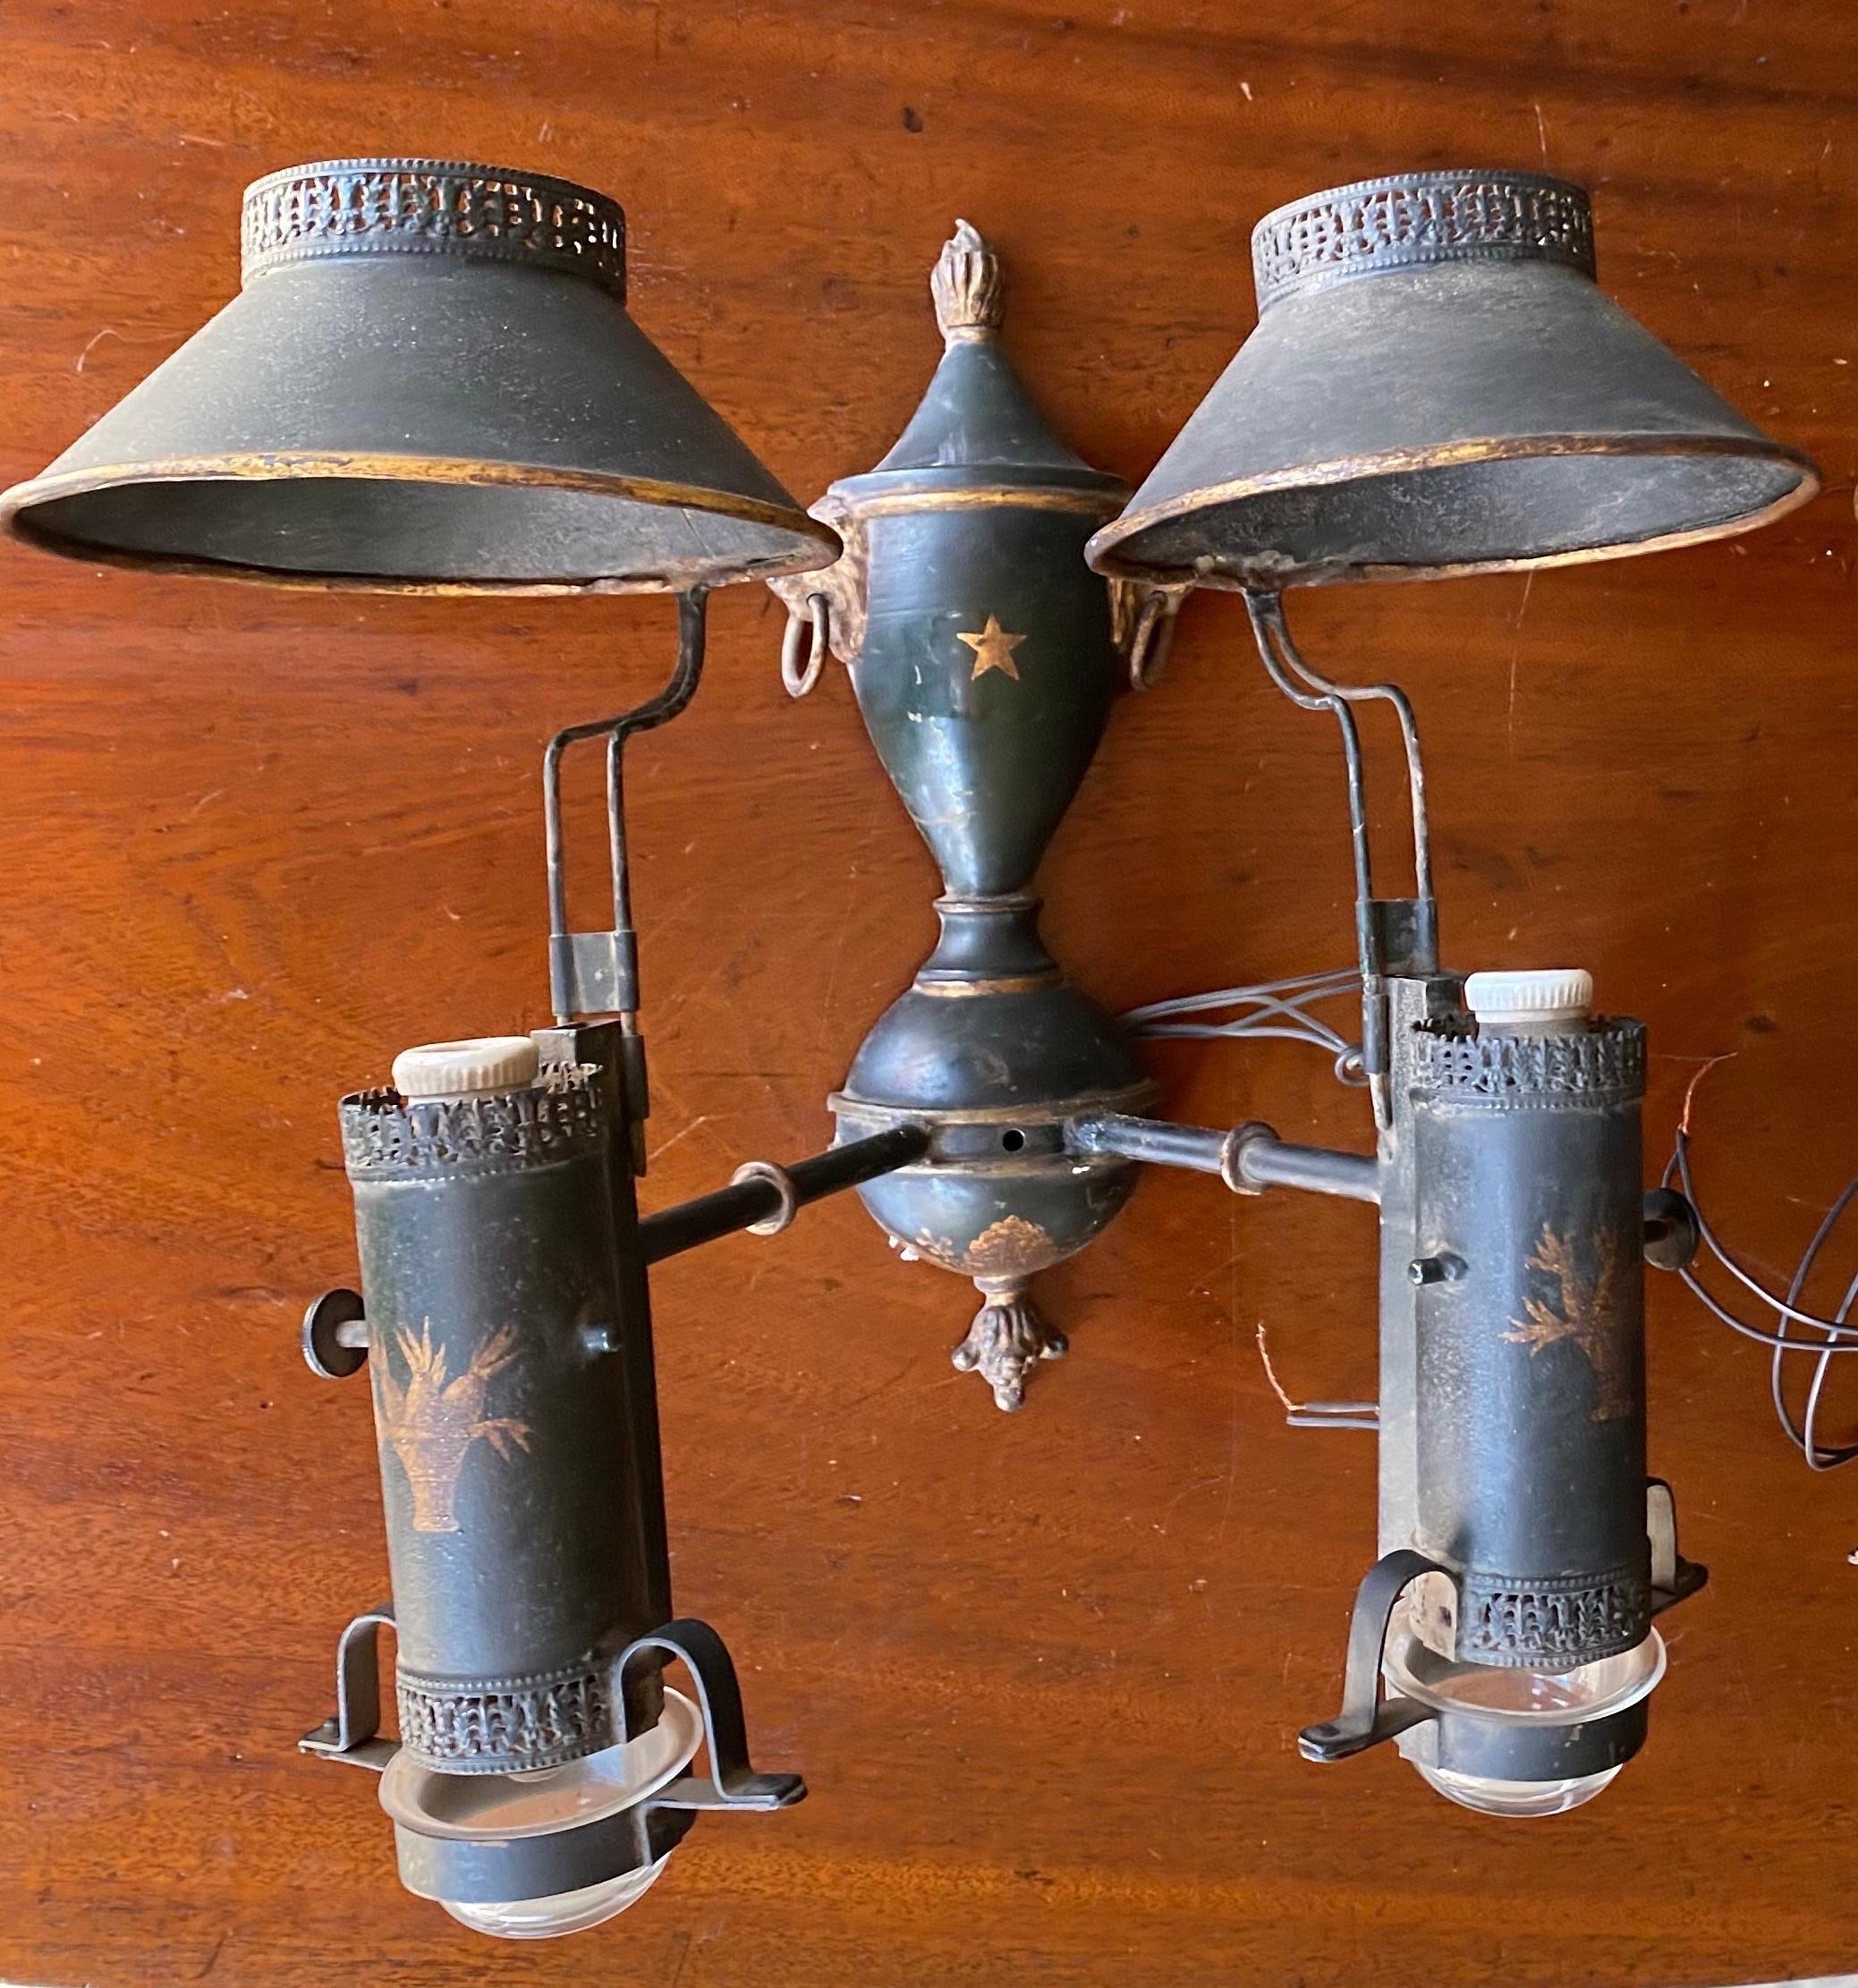 Great pair of 19th century Regency double light paint decorated tole sconces. Original oil vessels, removable shades with punchwork decoration, lions head pulls, and paint decoration throughout. 

Converted to electricity- just rewired and ready